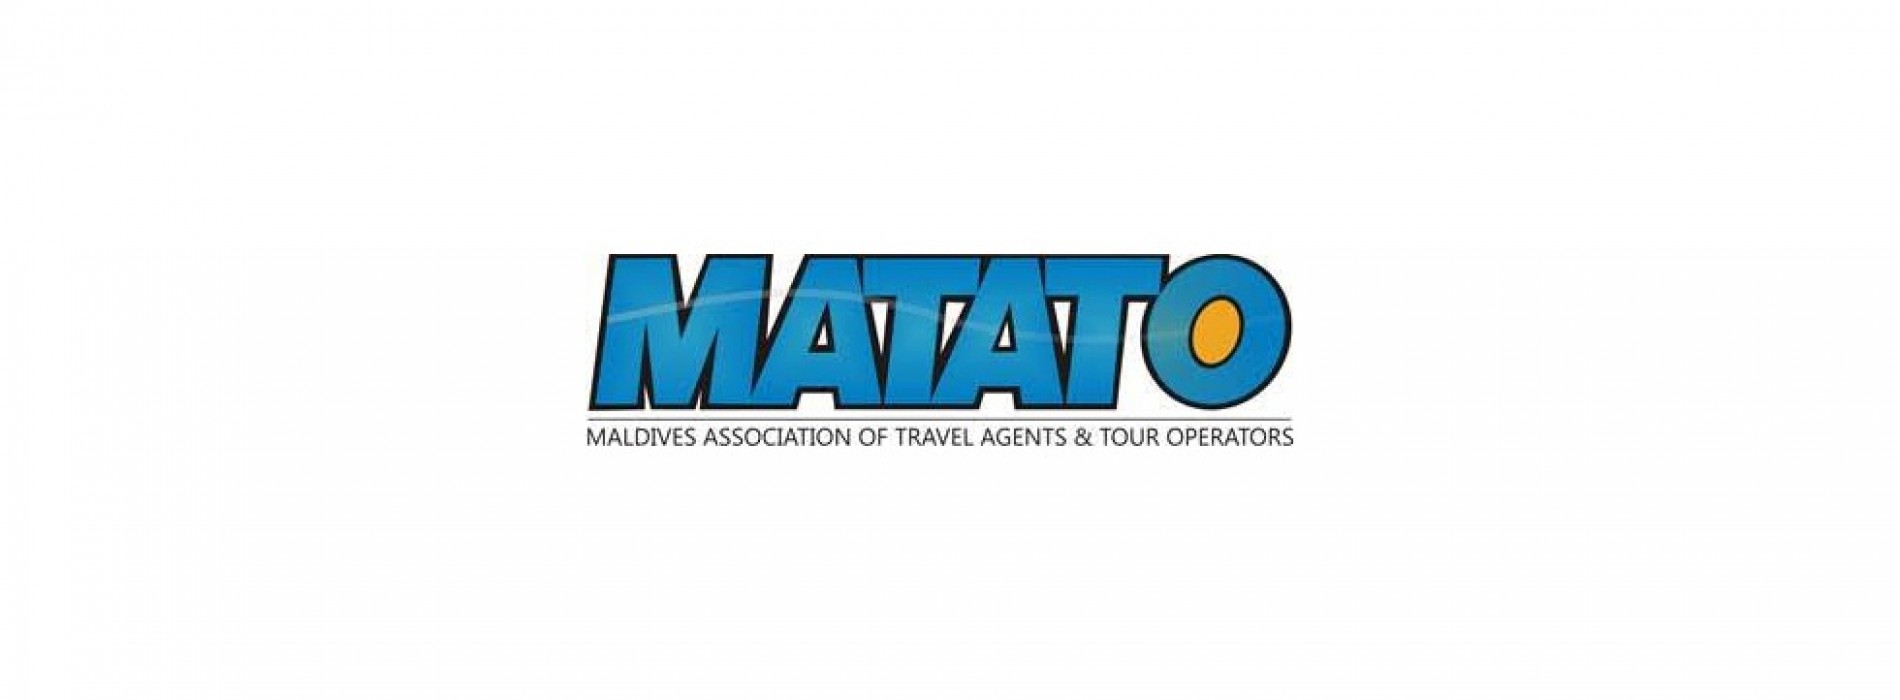 MATATO appoints Think Strawberries as its International PR and Representation Firm